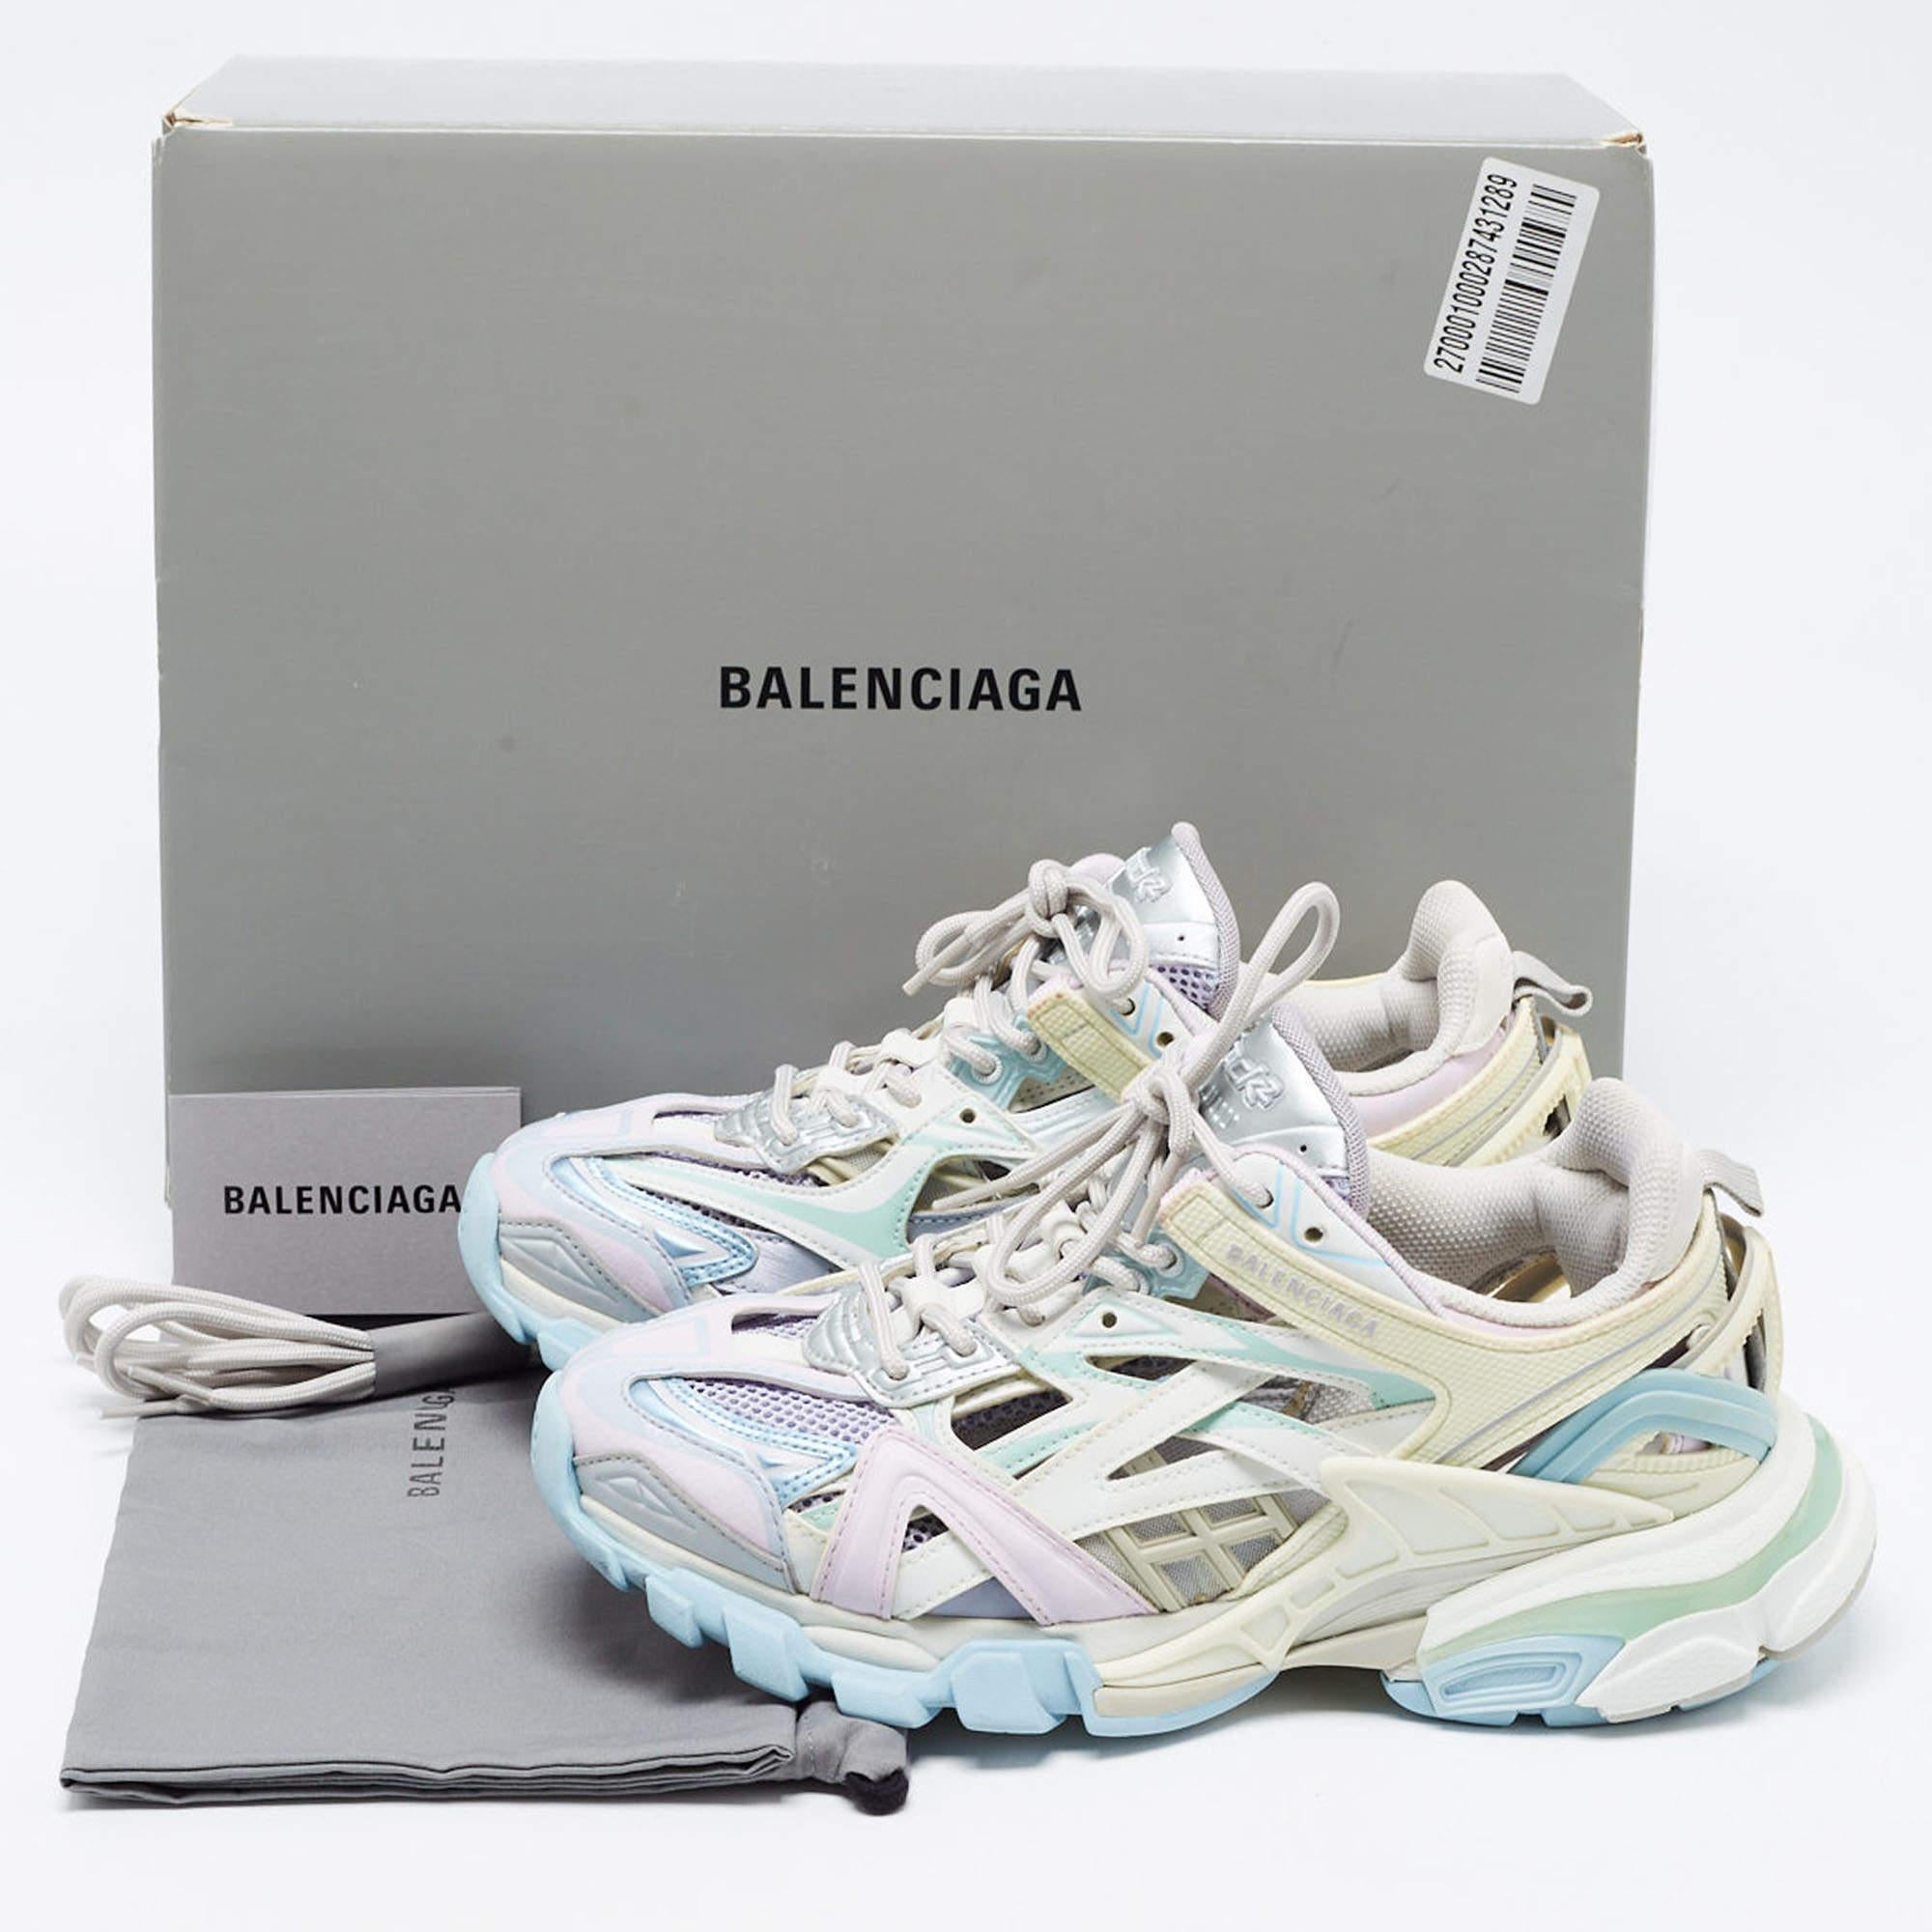 Balenciaga Multicolour Leather and Mesh Track 2 Low Top Sneakers Size 39 4